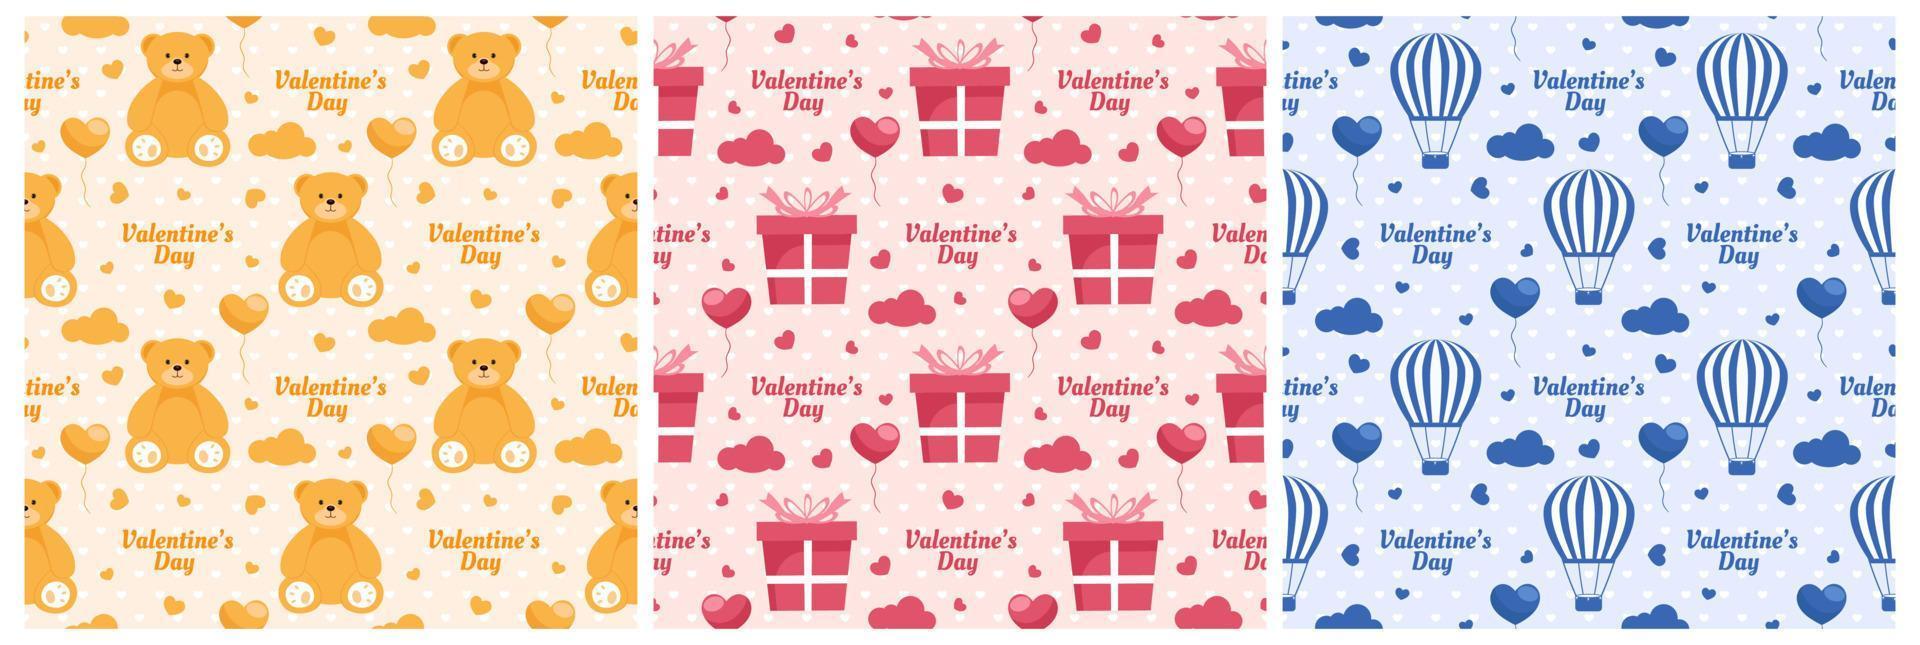 Set of Happy Valentine's Day Seamless Pattern Design with Decoration in Template Hand Drawn Cartoon Flat Illustration vector